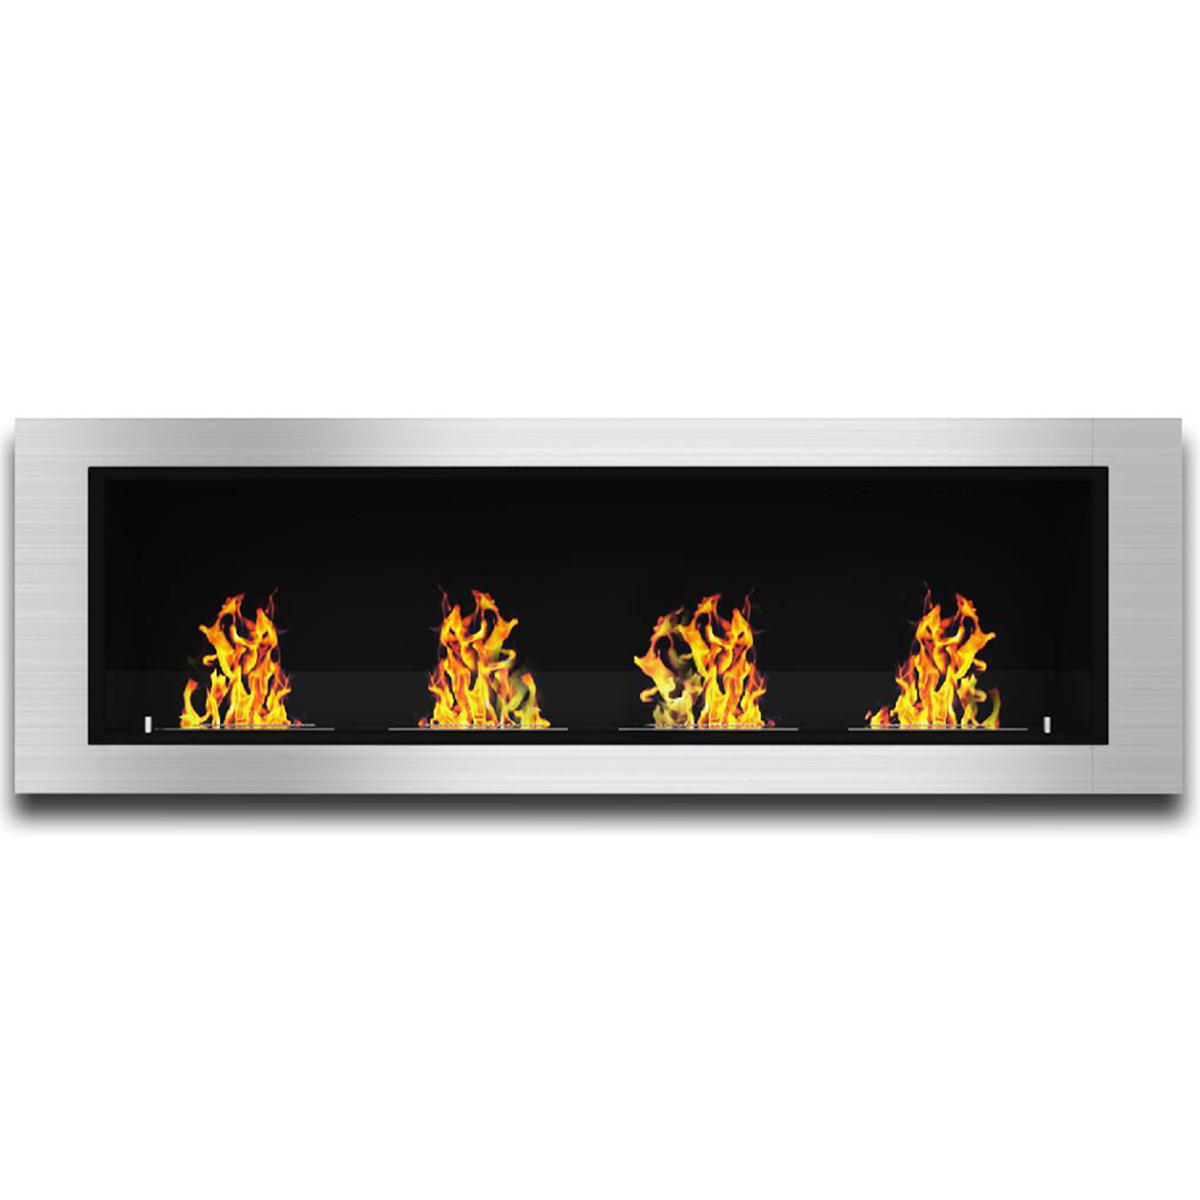 Regal Flame Lenox 54 Inch Ventless Built In Recessed Bio Ethanol Wall Mounted Fireplace